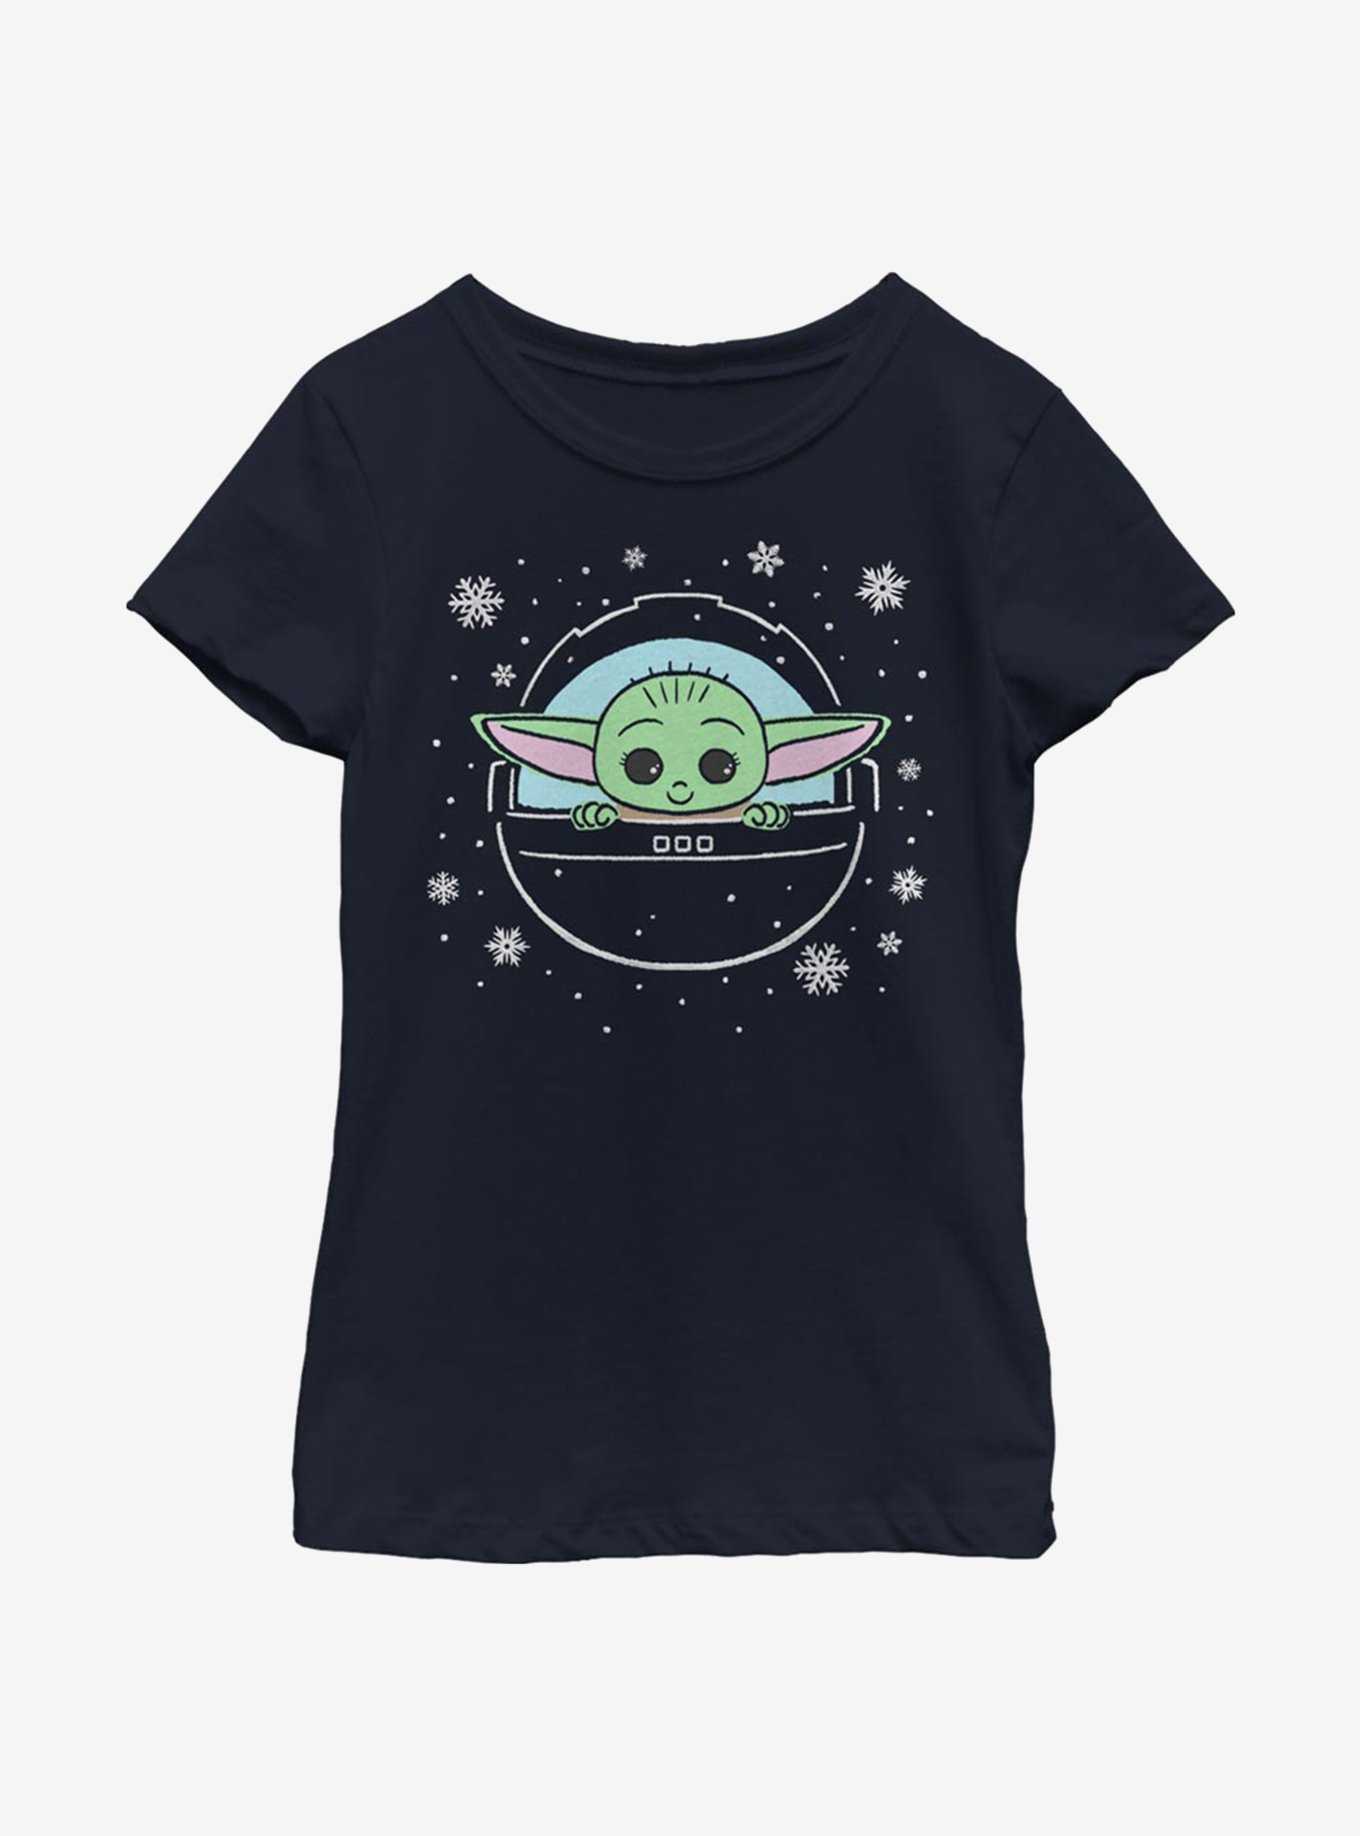 Star Wars The Mandalorian The Snow Child Youth Girls T-Shirt, , hi-res